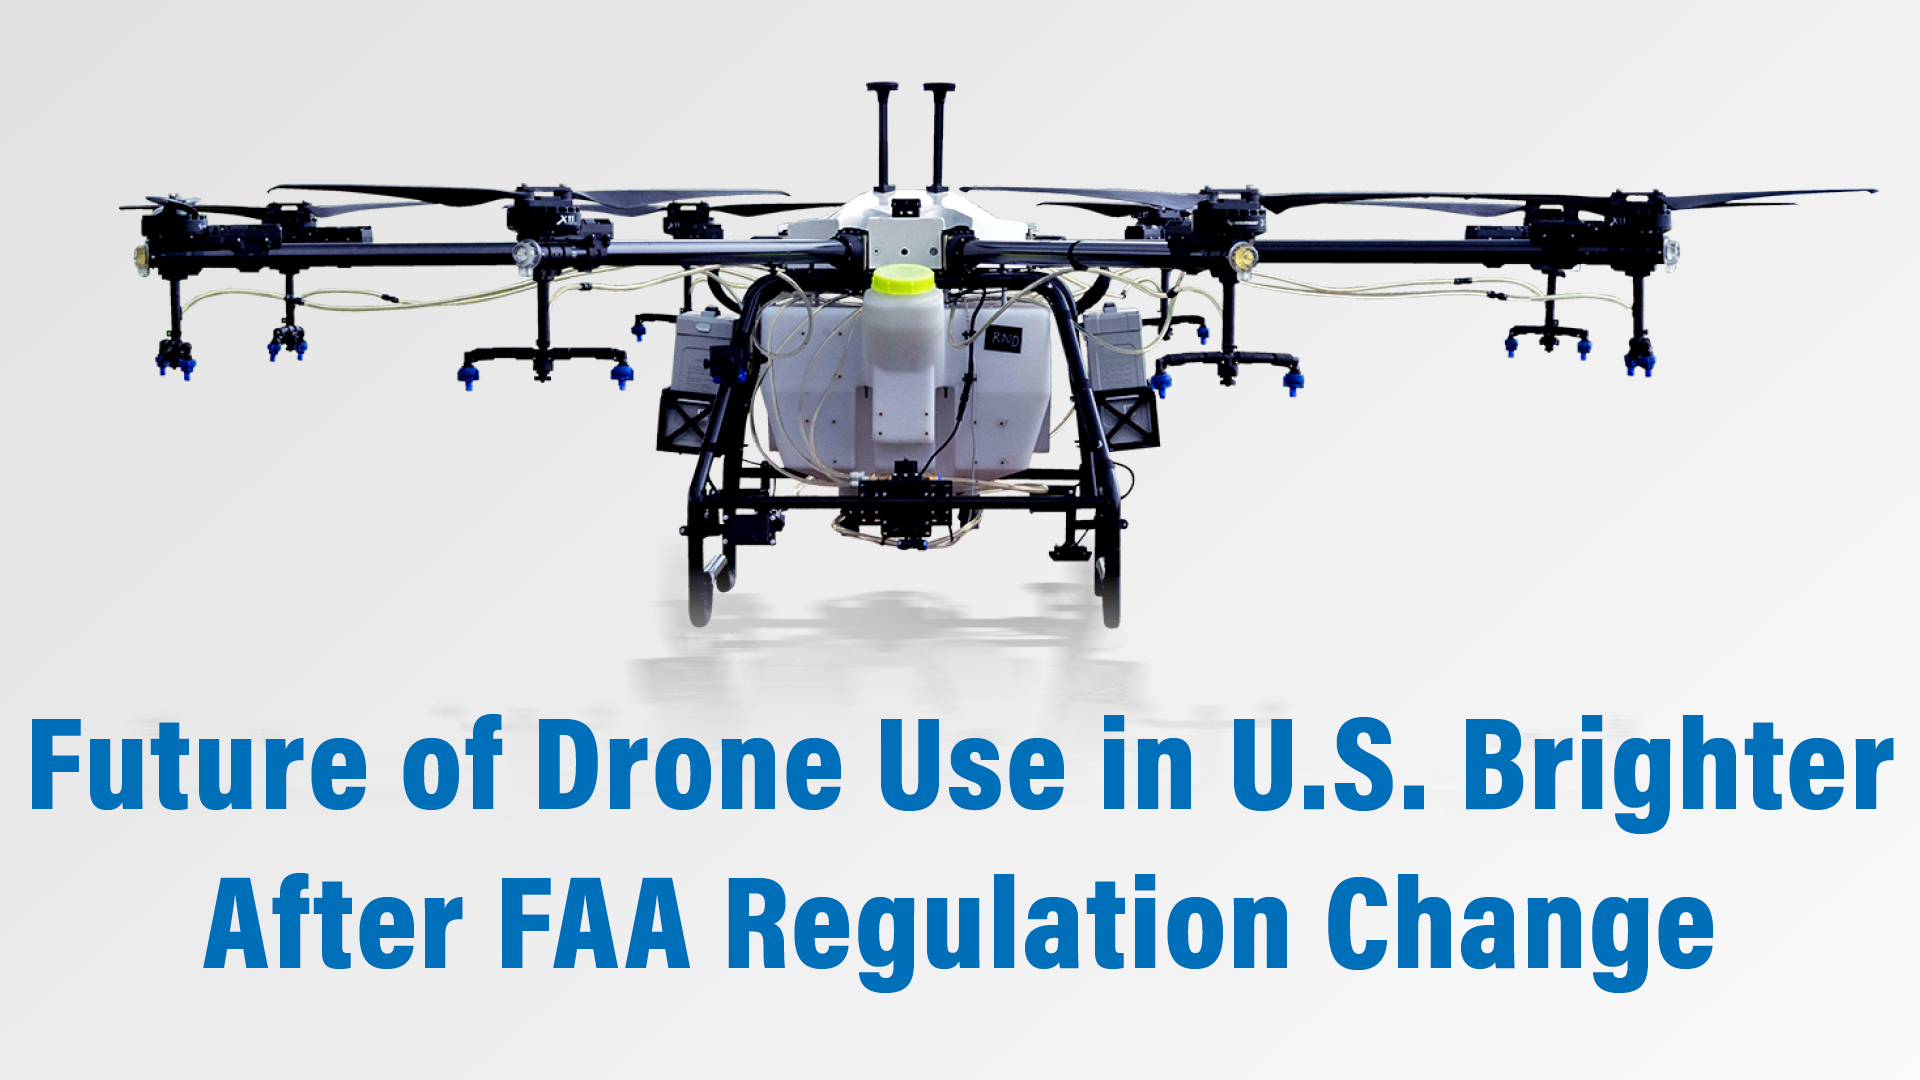 [Technology Corner] New FAA Regulations Give Bright Future for Drone Use in the U.S.